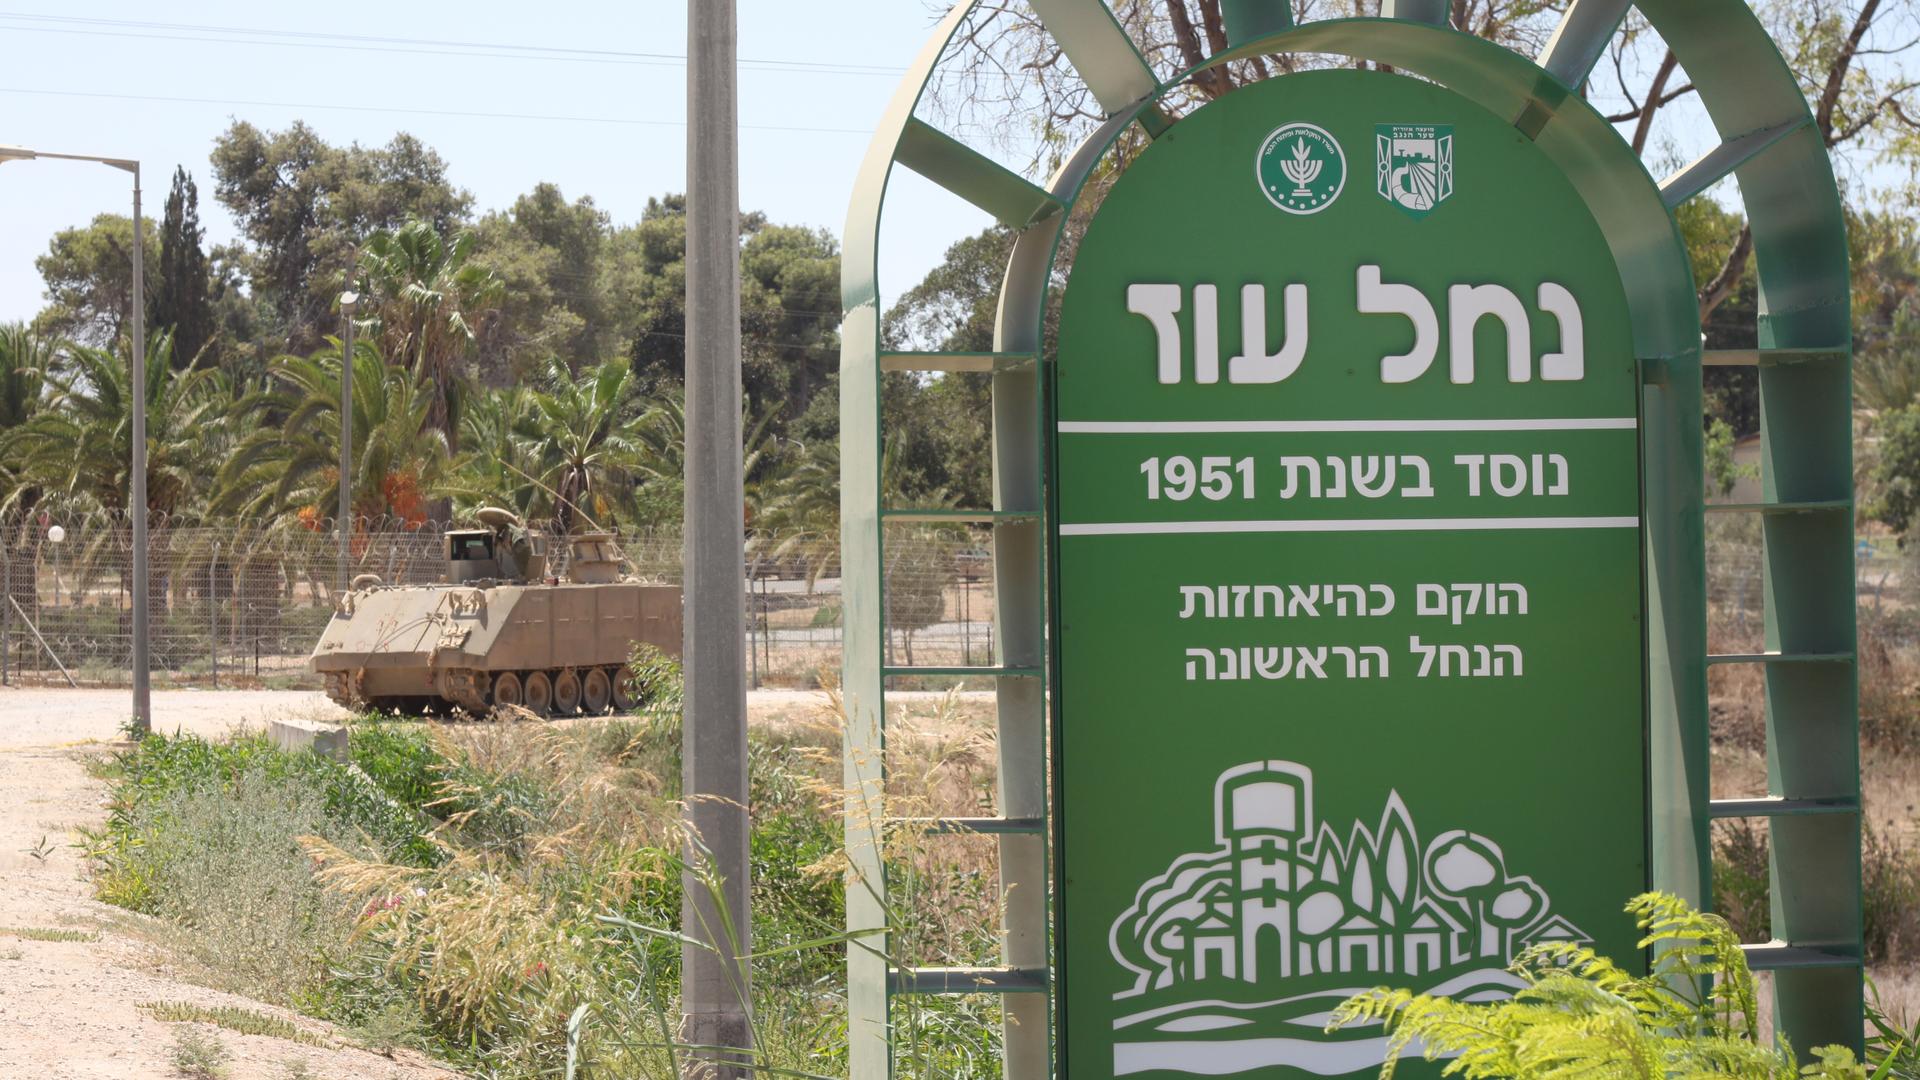 An armored vehicle at the entrance to Kibbutz Nahal Oz, established in 1951 along the Gaza border.